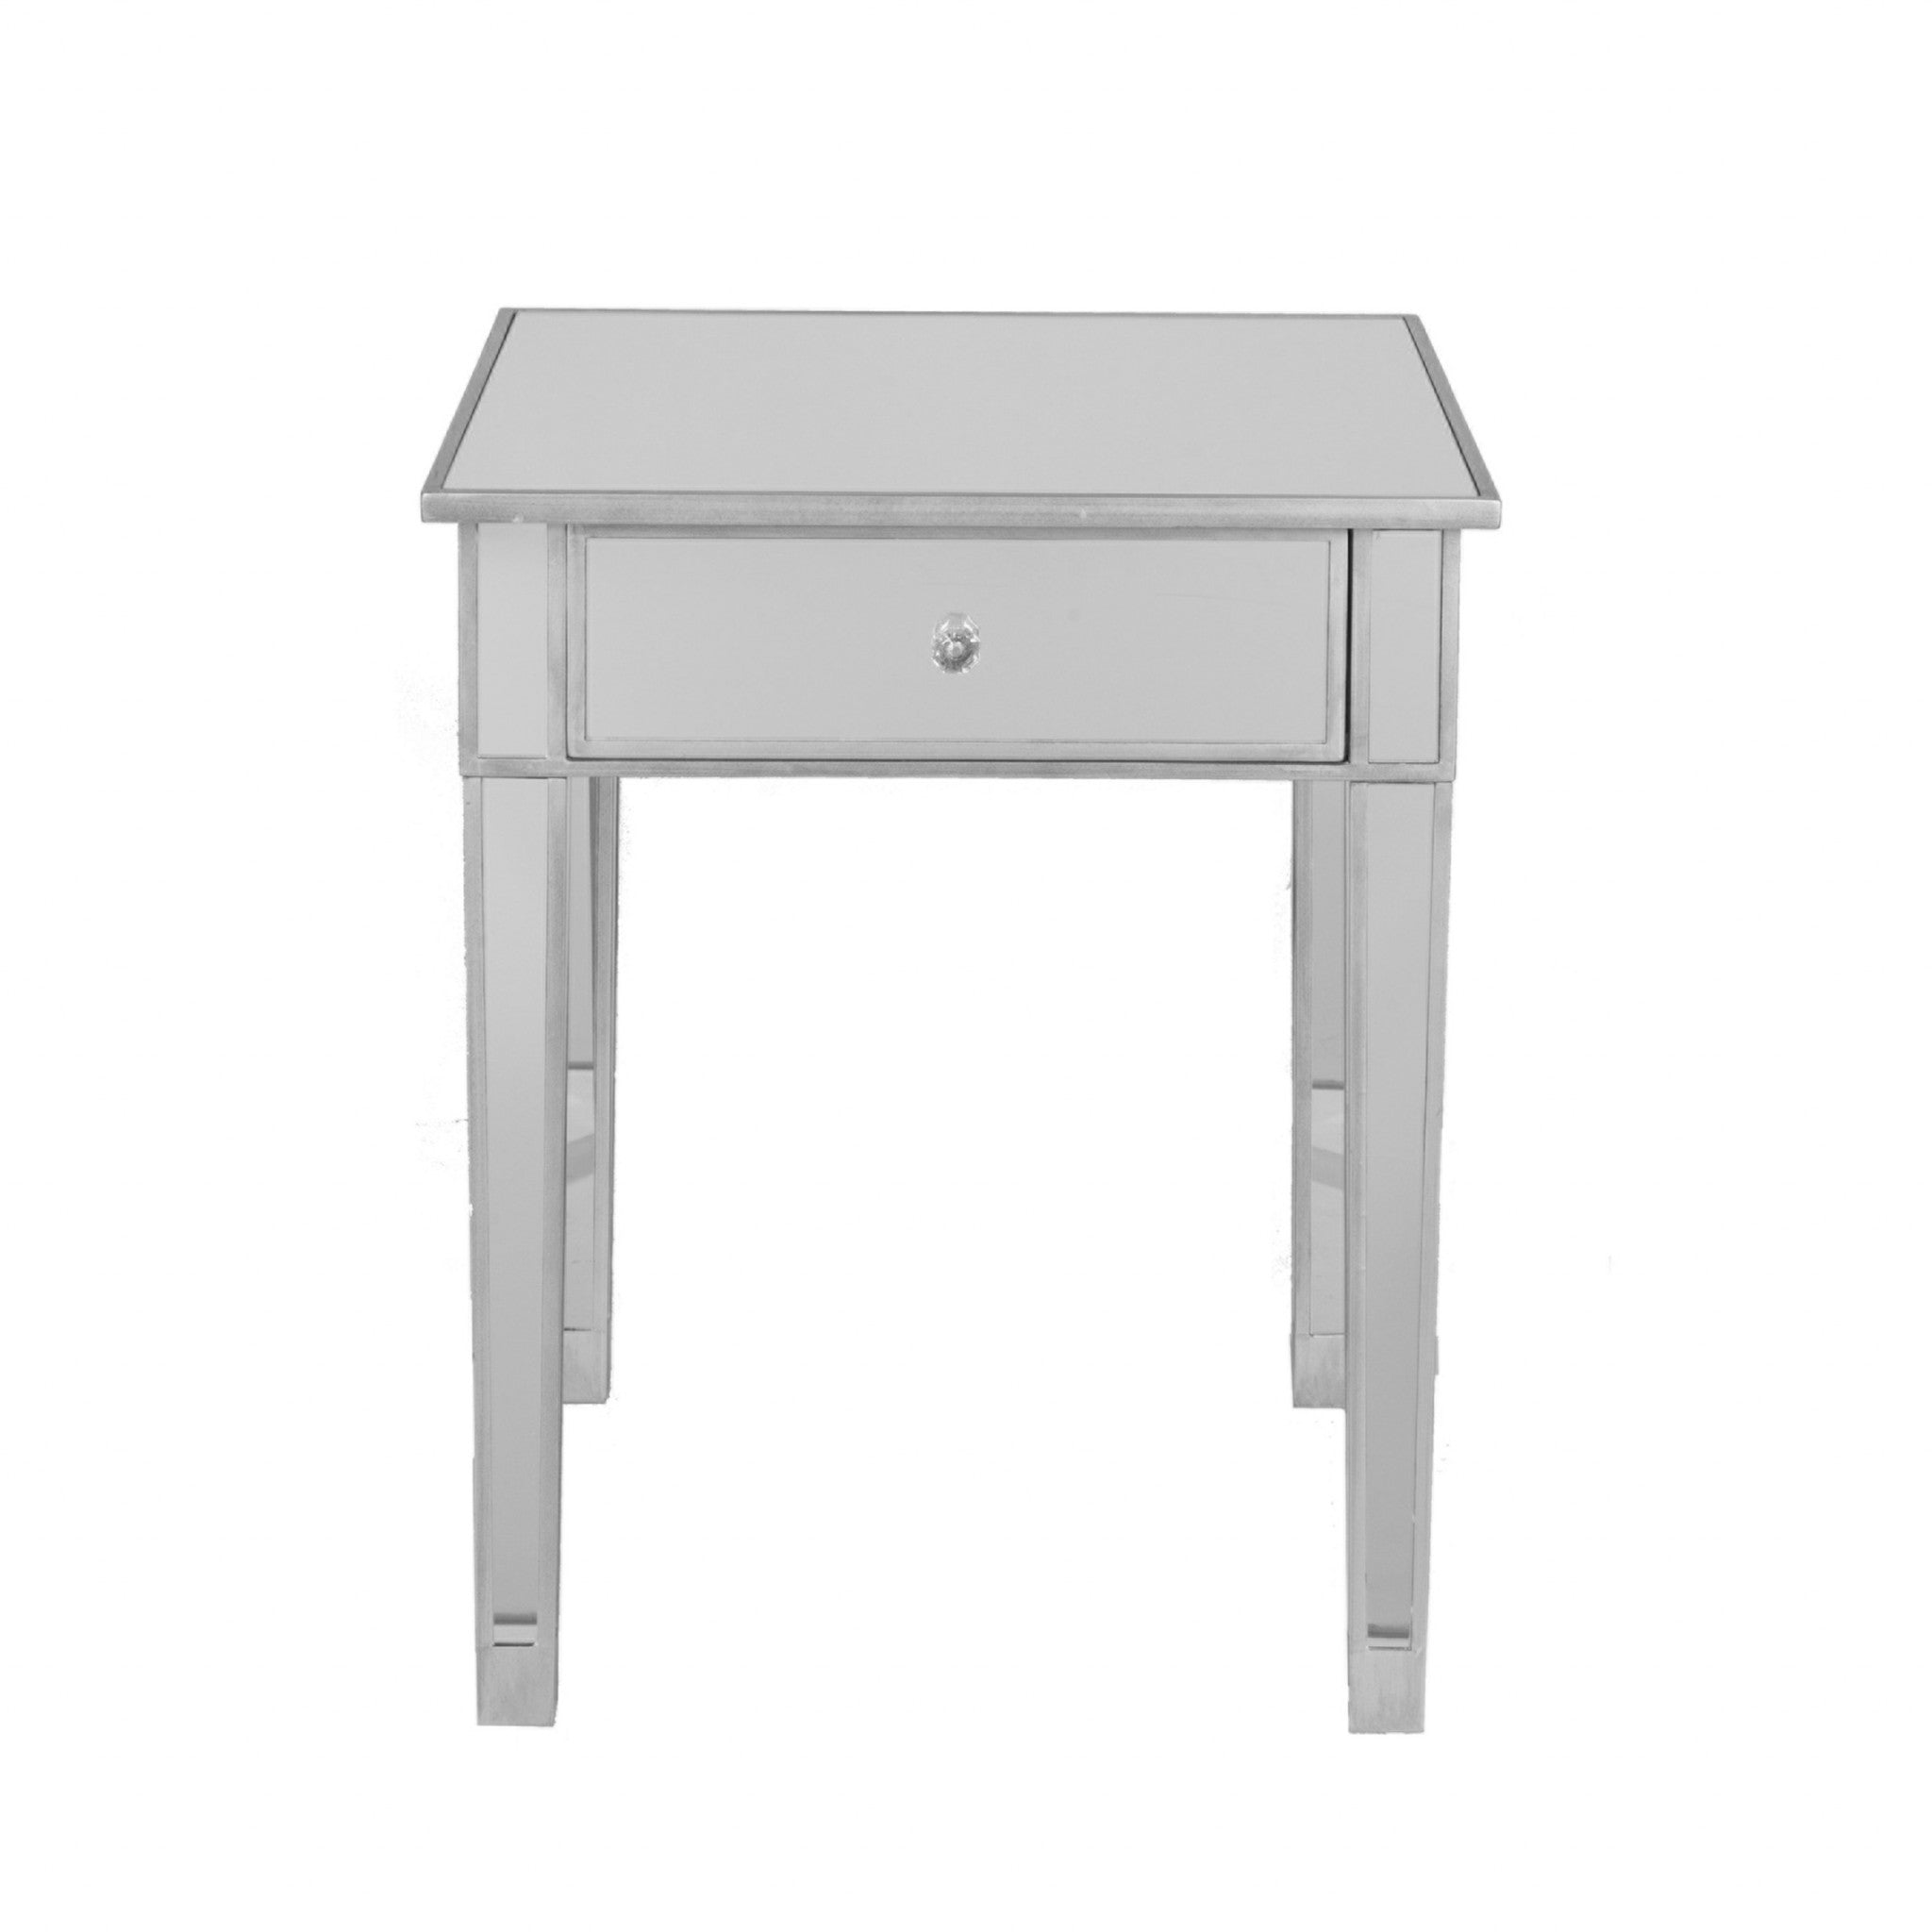 29" Silver And Reflective Glass Square End Table With Drawer